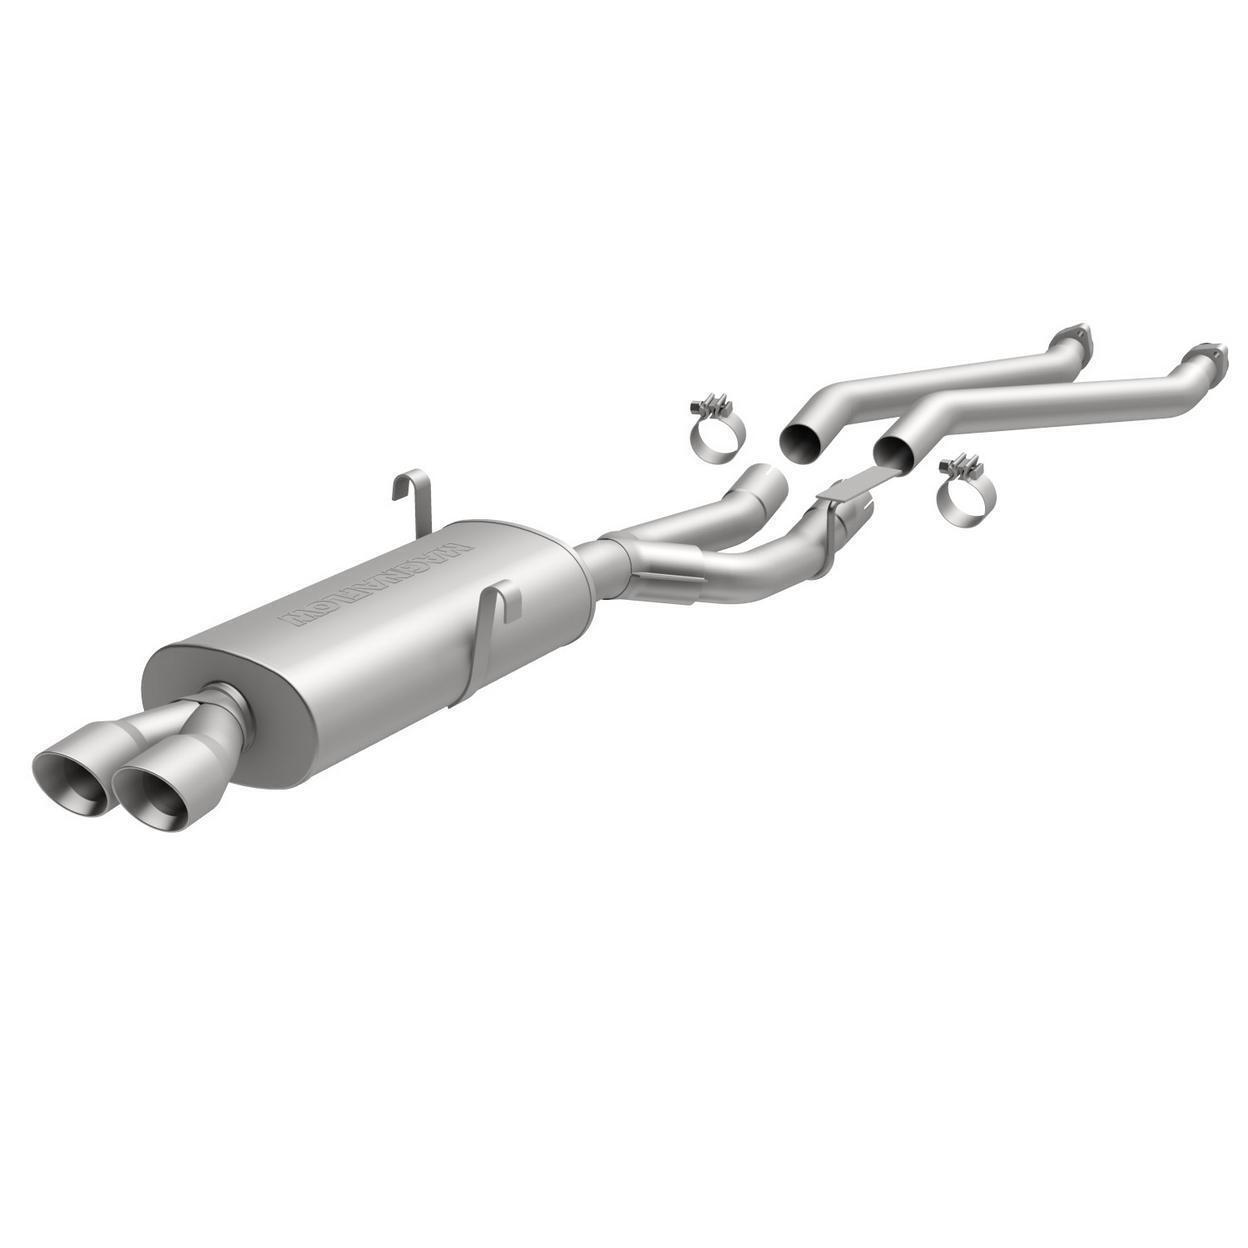 MagnaFlow 16535-AN Exhaust System Kit for 1991 BMW 325is